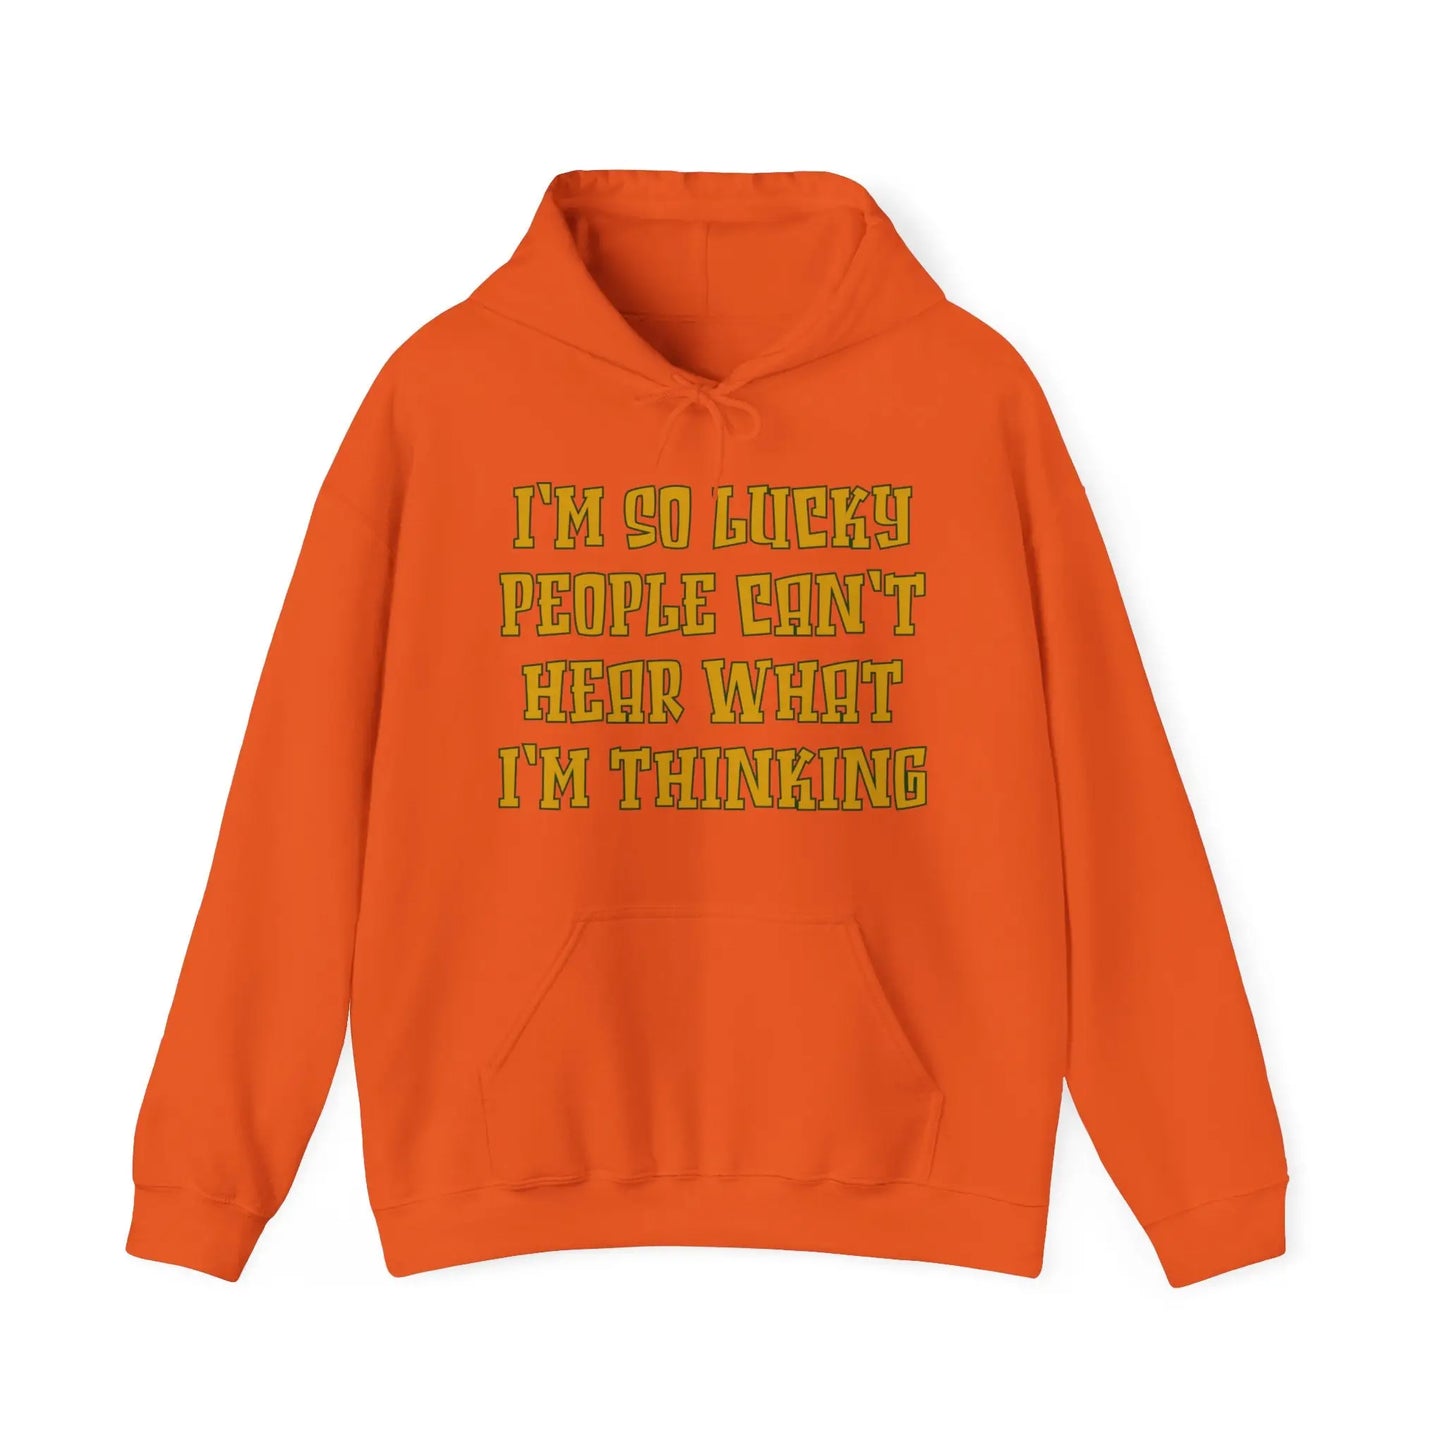 Can't Hear What I'm Thinking Men's Hoodie - Wicked Tees